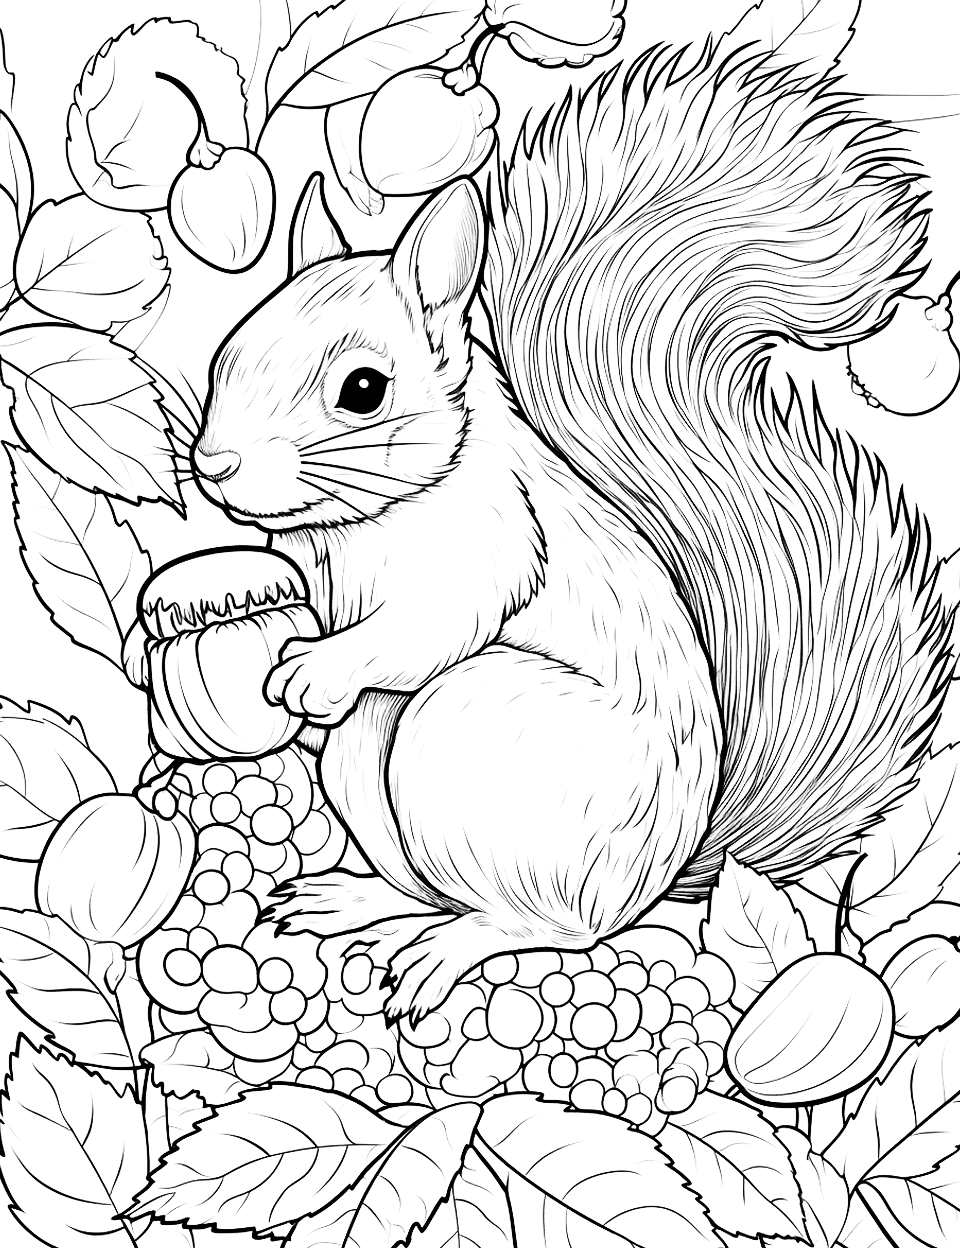 Squirrel's Nutty Affair Adult Coloring Page - A squirrel clutching a large acorn with leaves surrounding it.